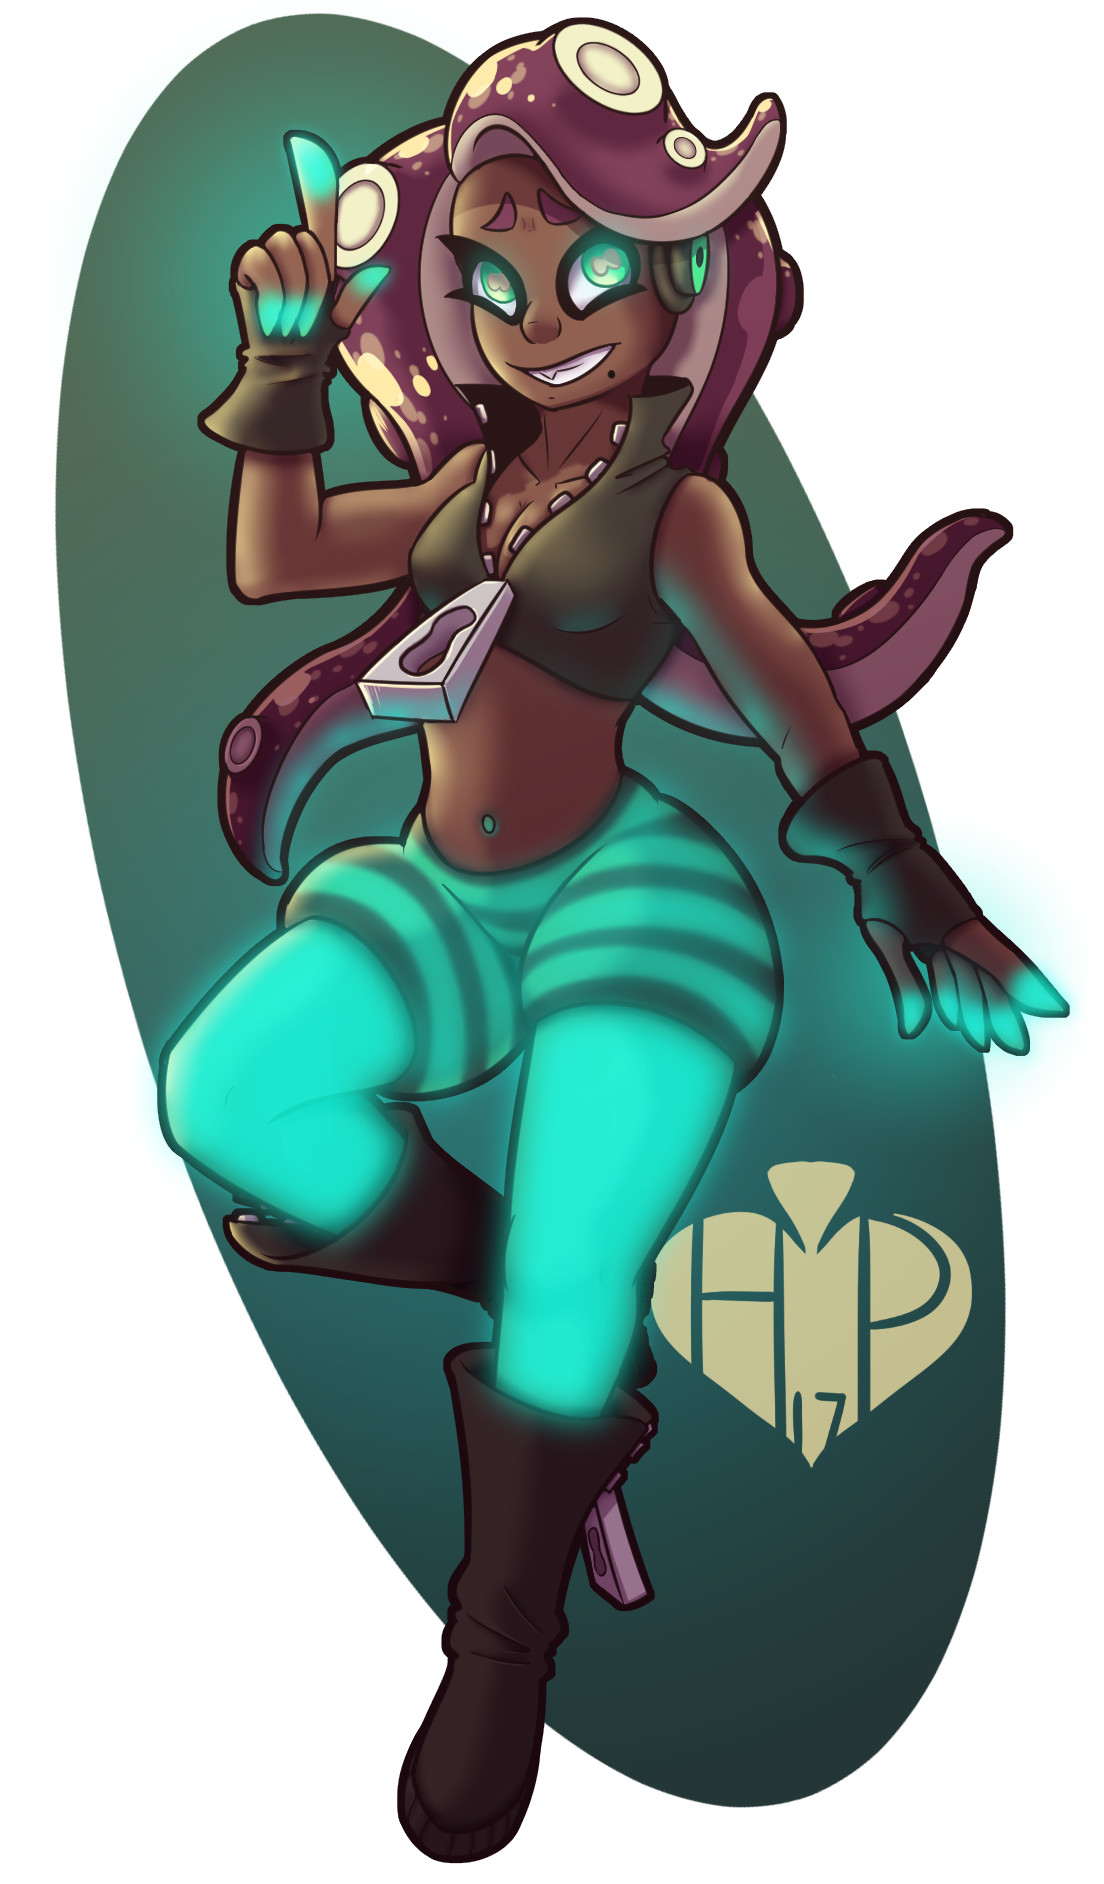 Fanart of Marina, member of Off The Hook from Splatoon 2. Don't get co...